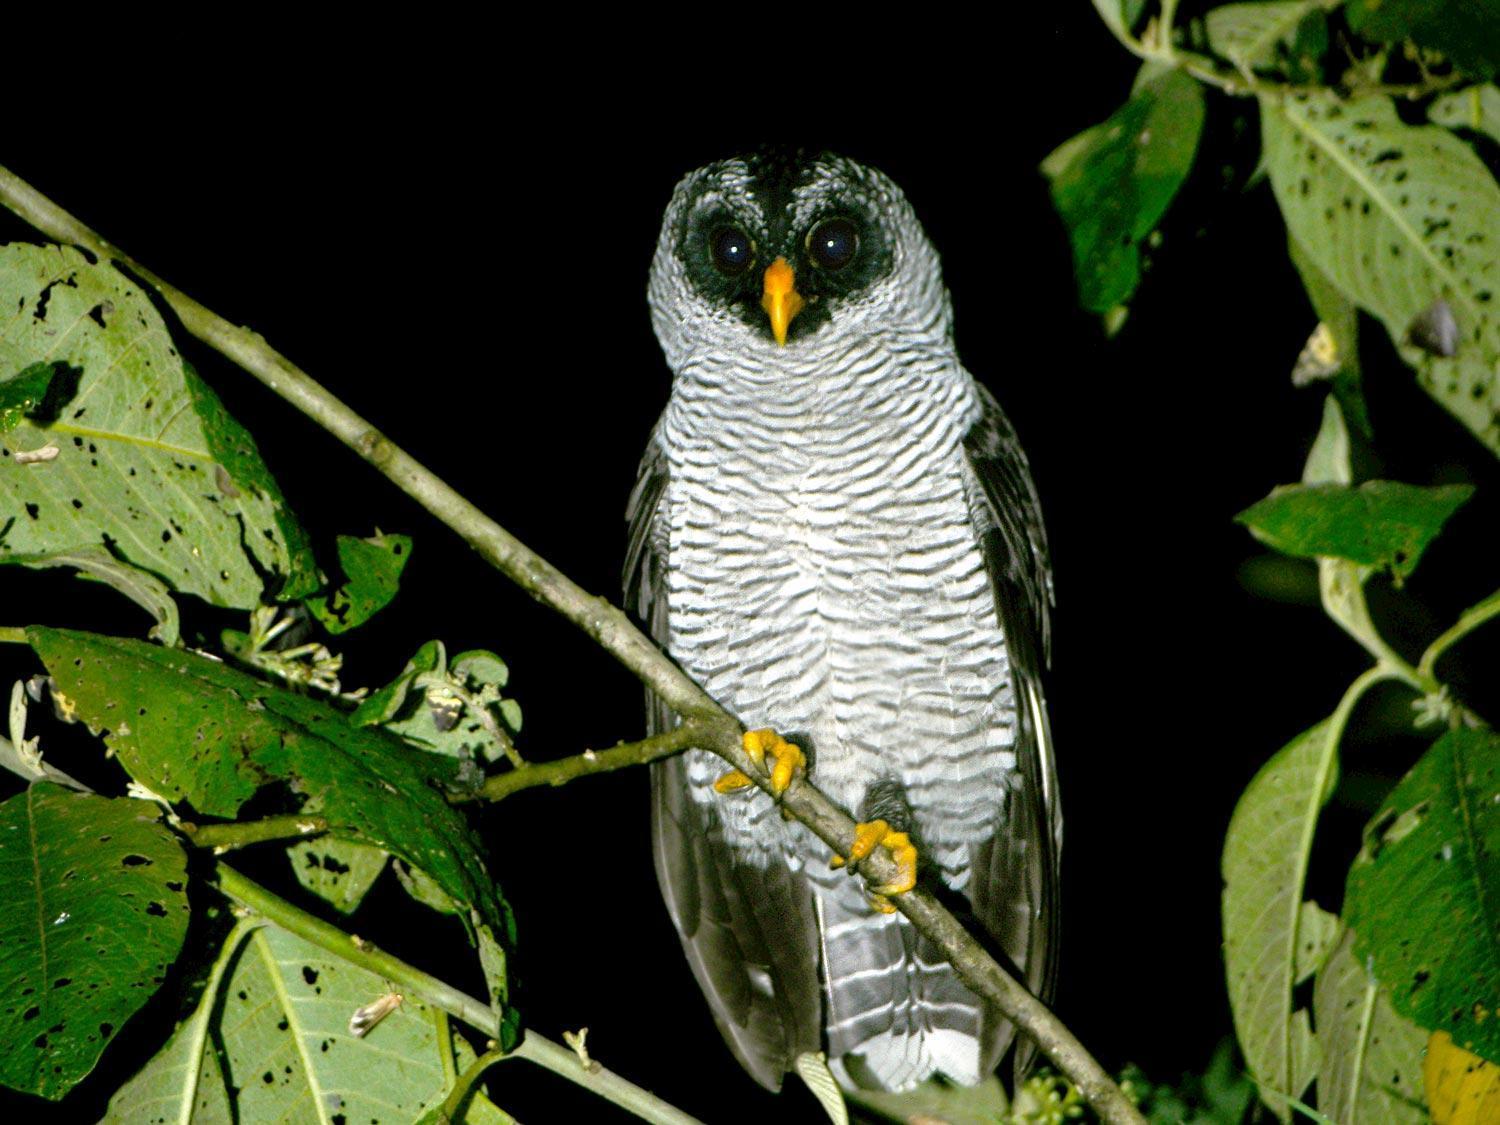 Black-and-white Owl Photo by pancho enriquez